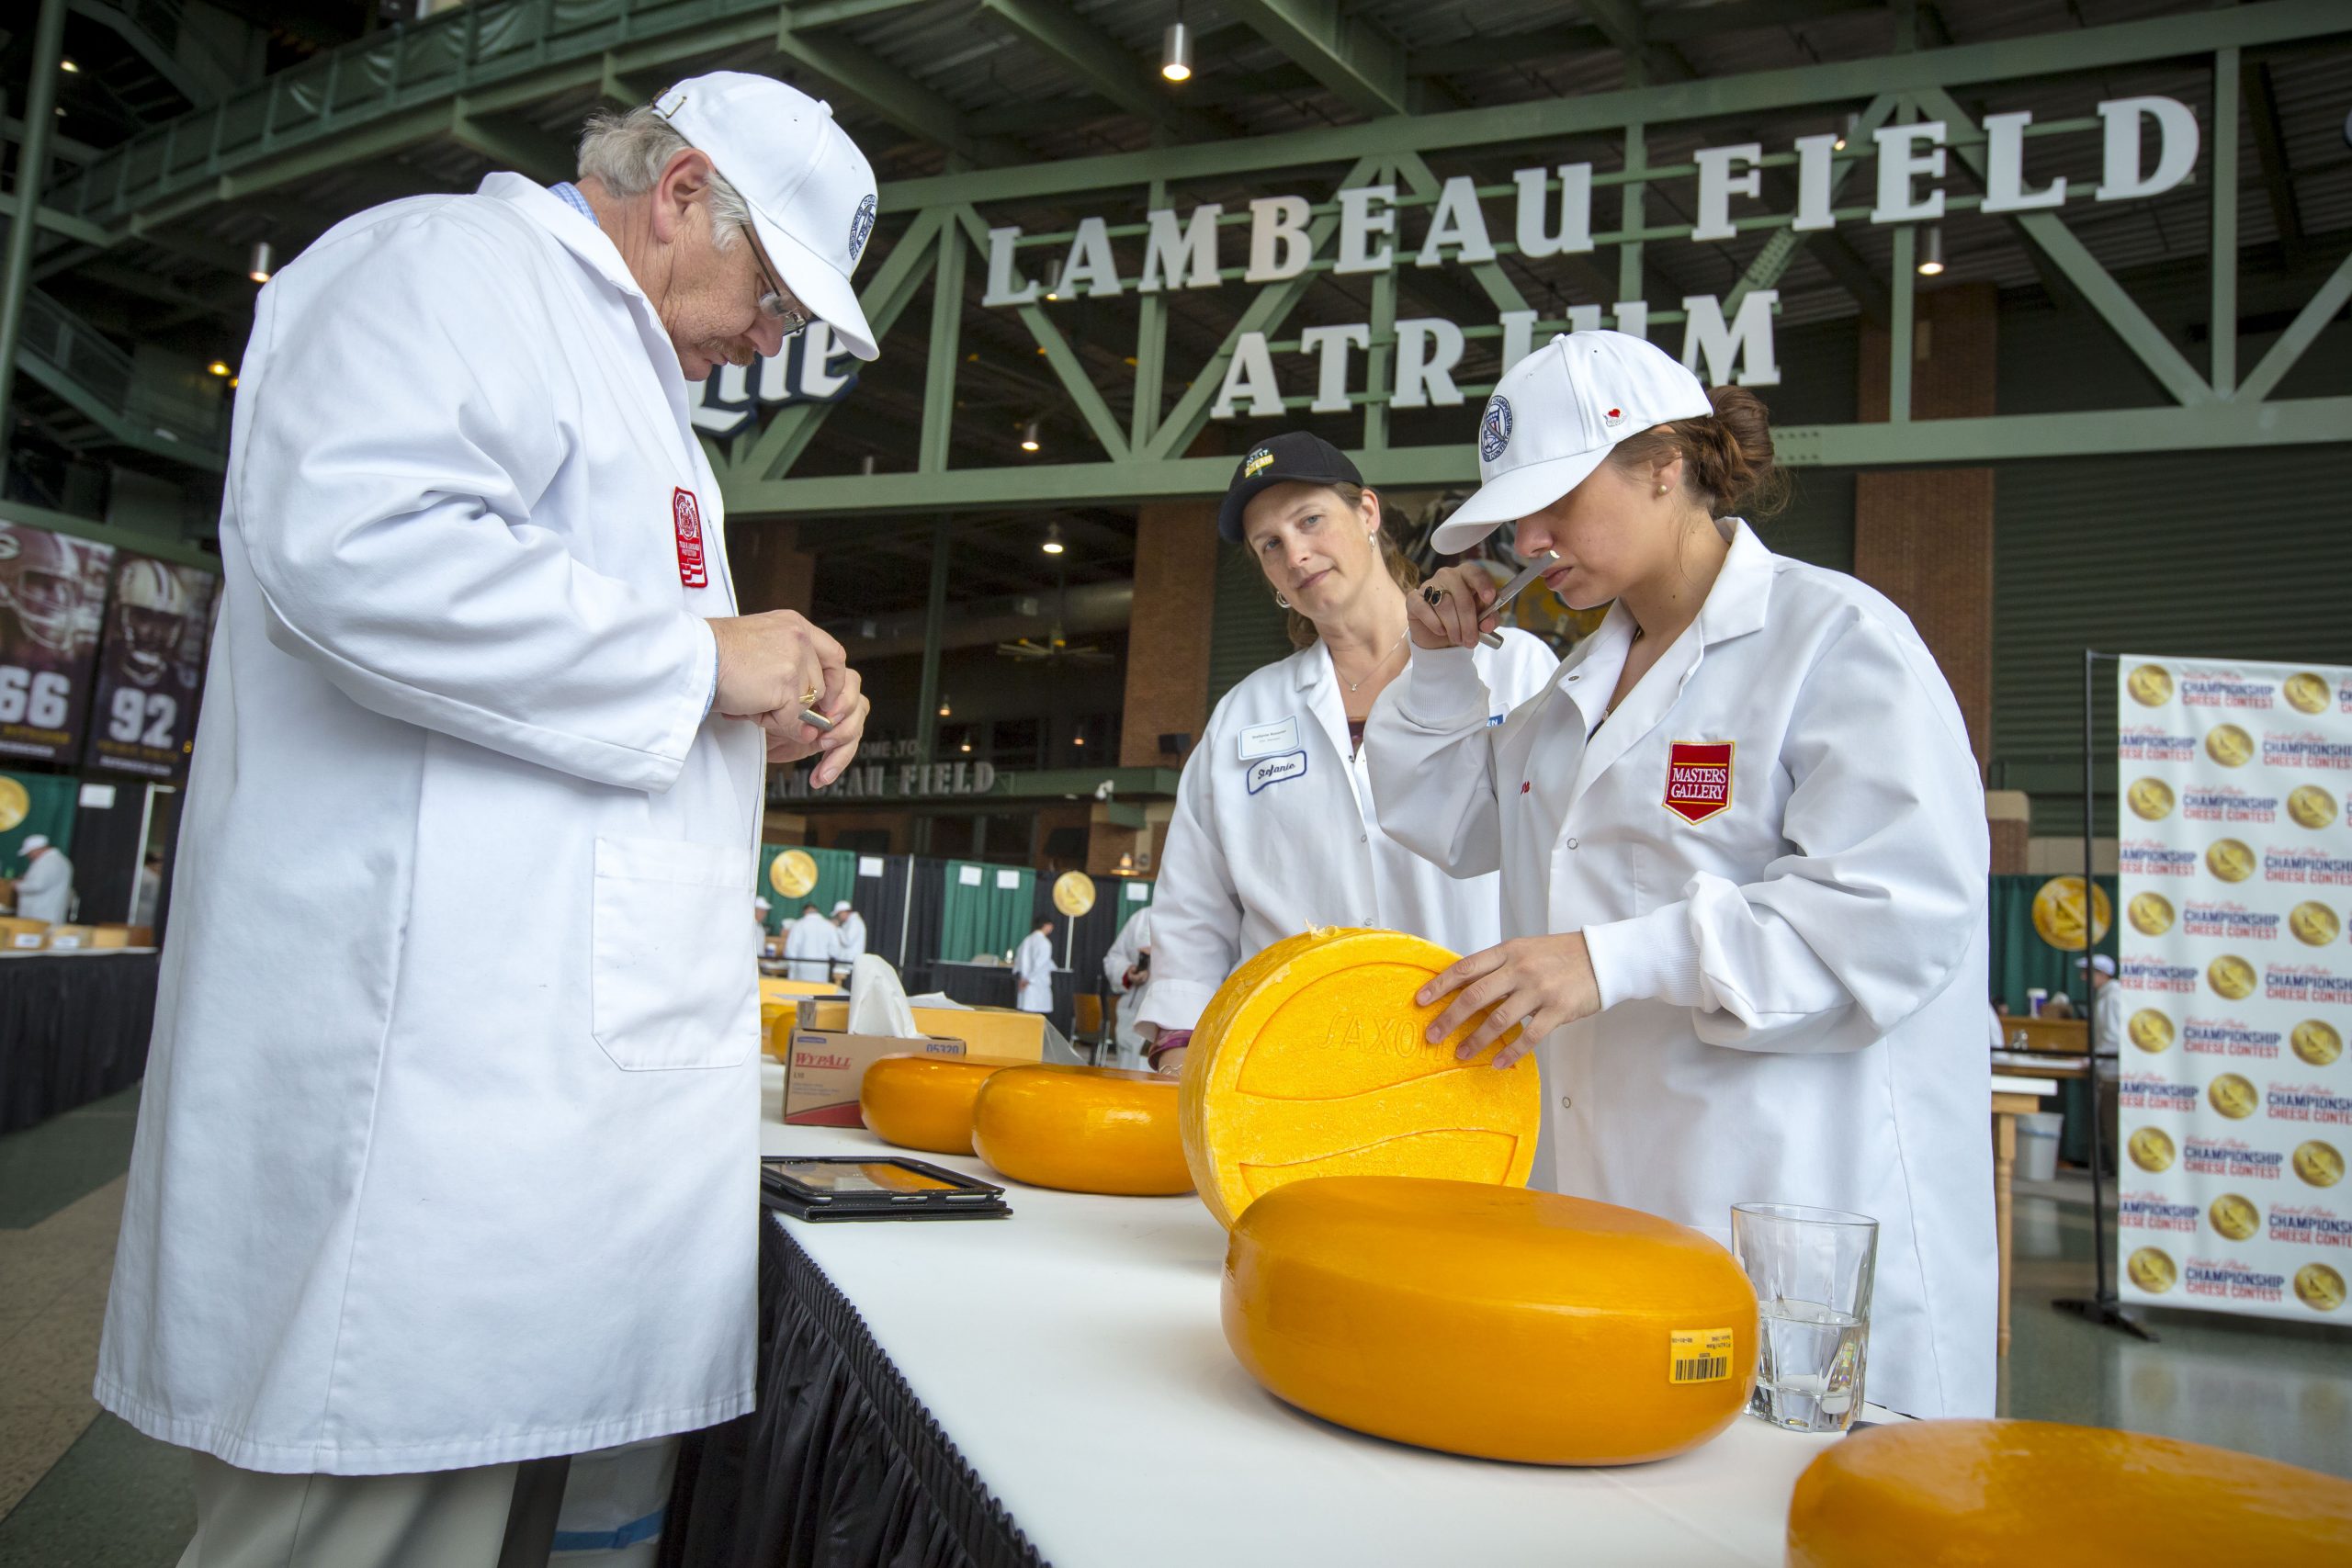 2017 US Cheese Championships in Green Bay, Wisconsin.  Photo by Mike Roemer 2017 US Cheese Championship in Green Bay, Wisconsin.  Photo by Mike Roemer